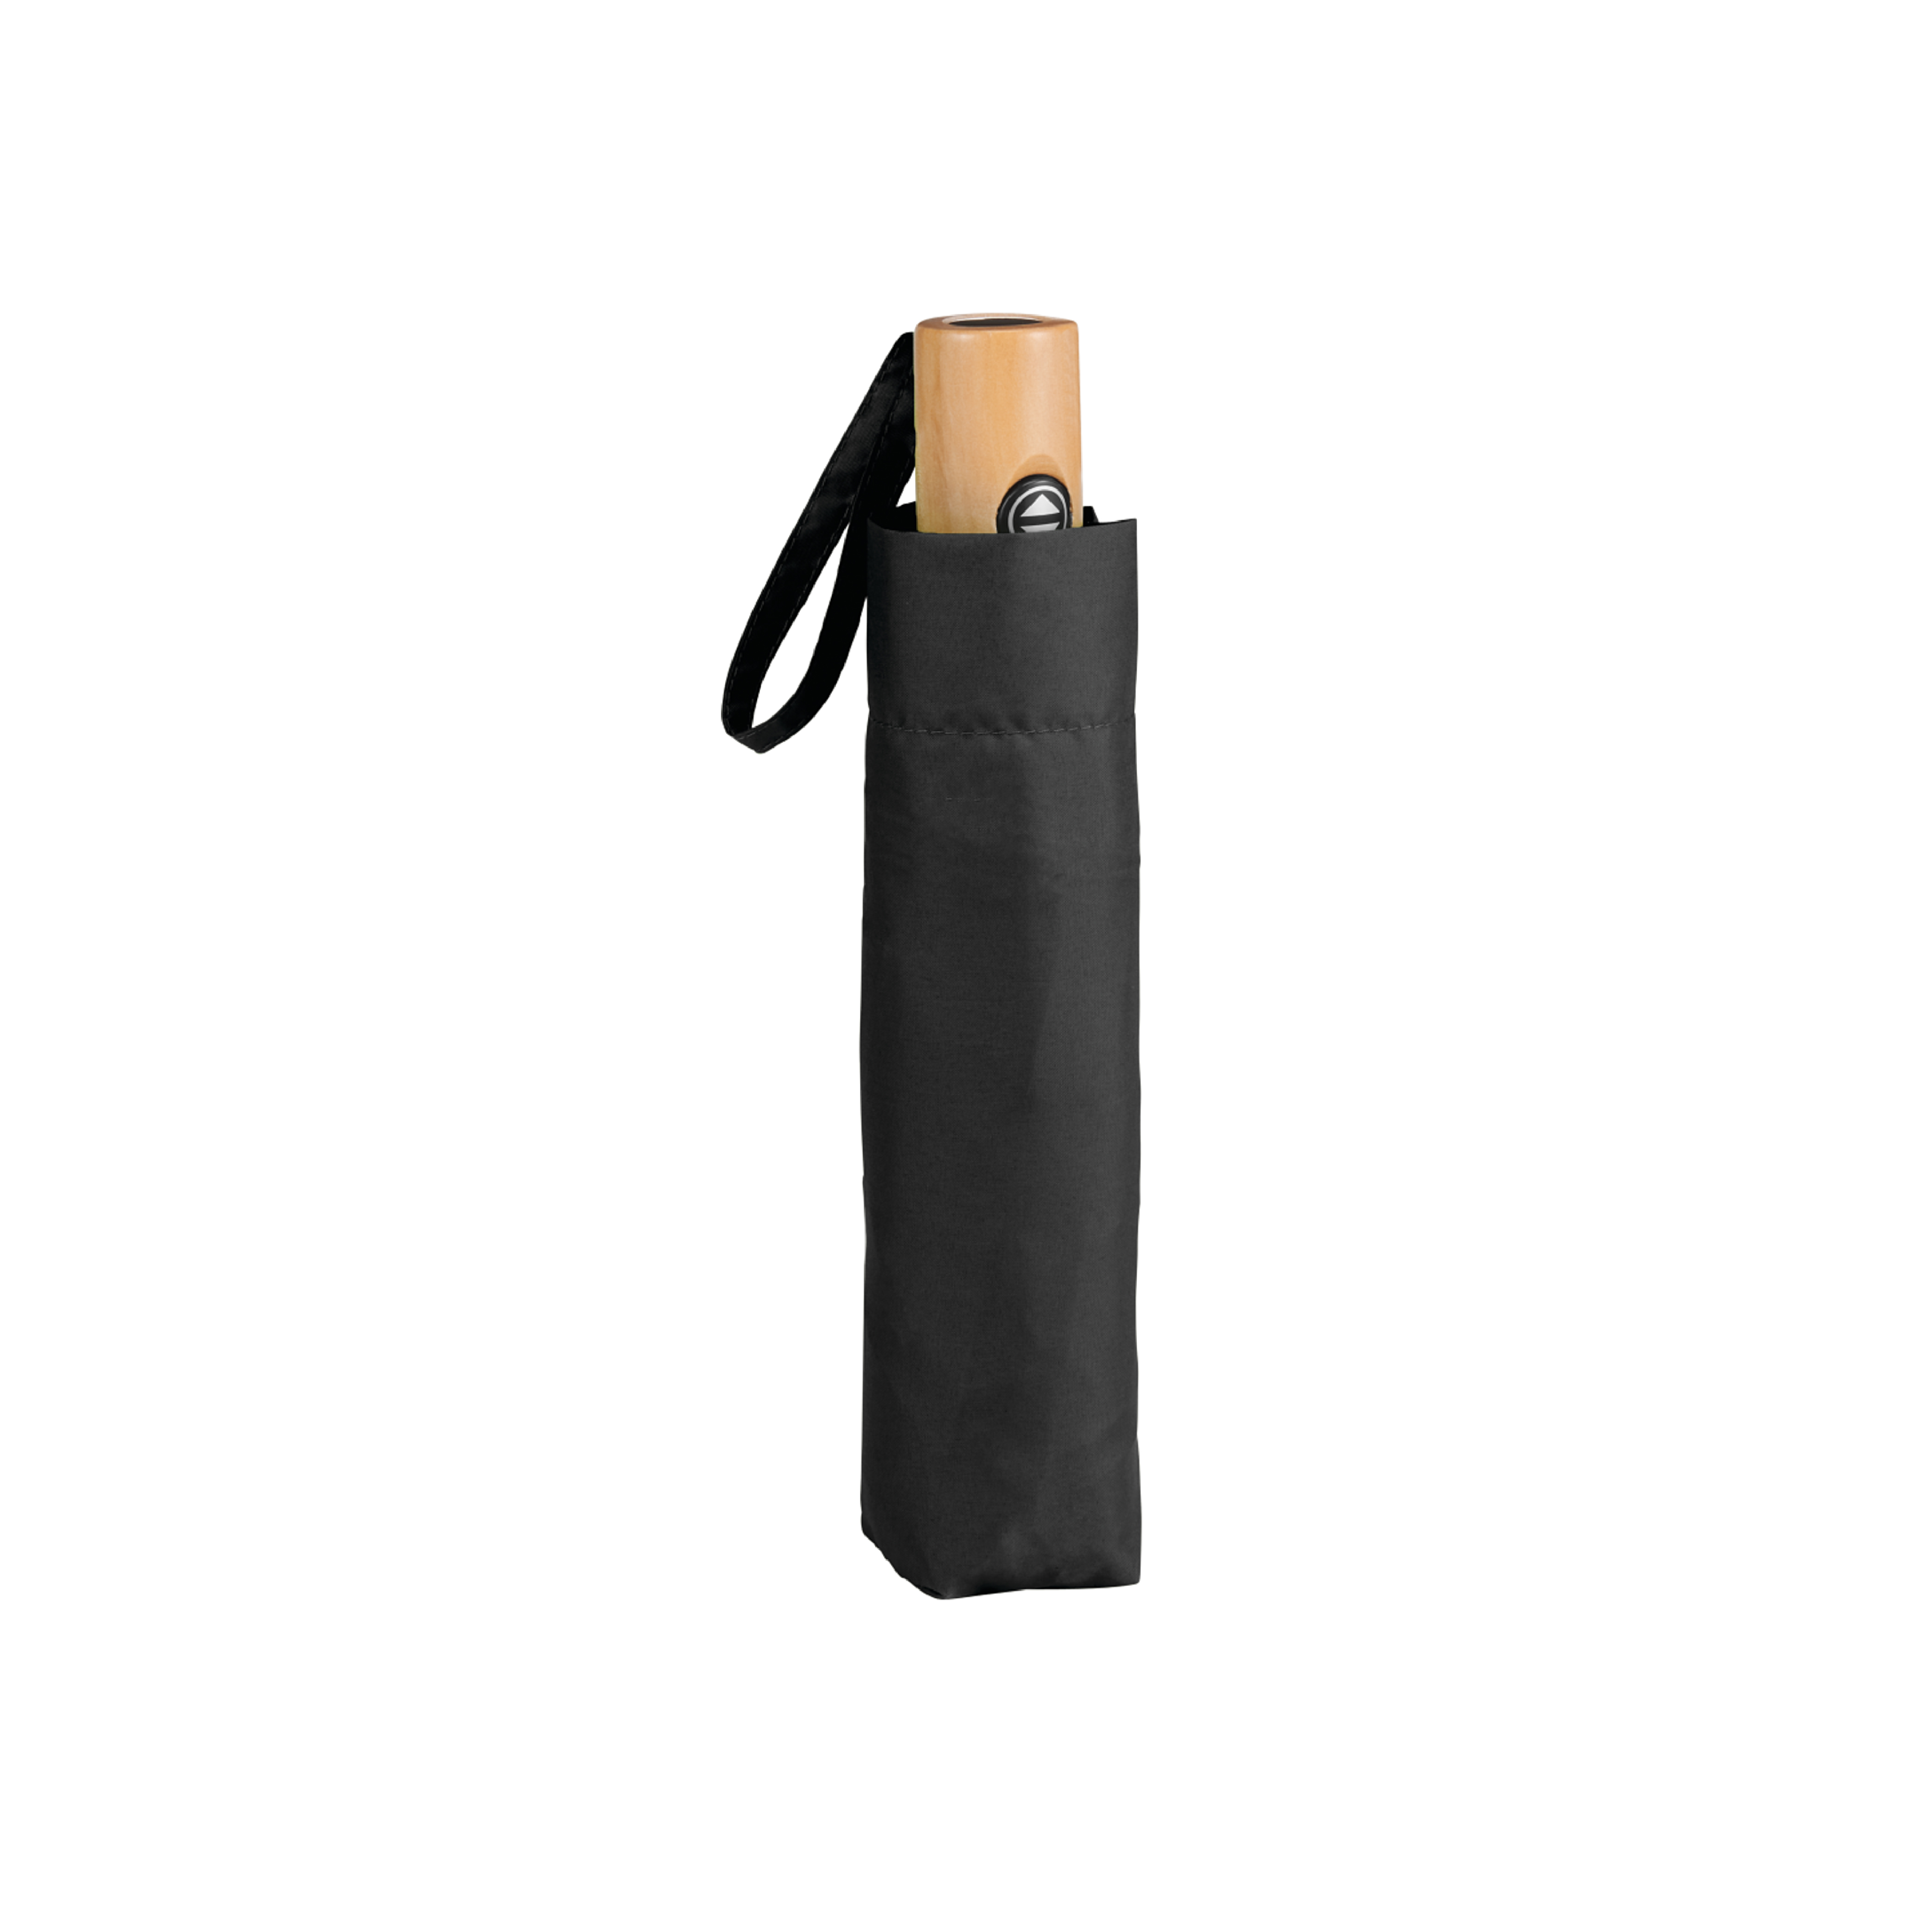 Recycled RPET auto open travel umbrella compact size